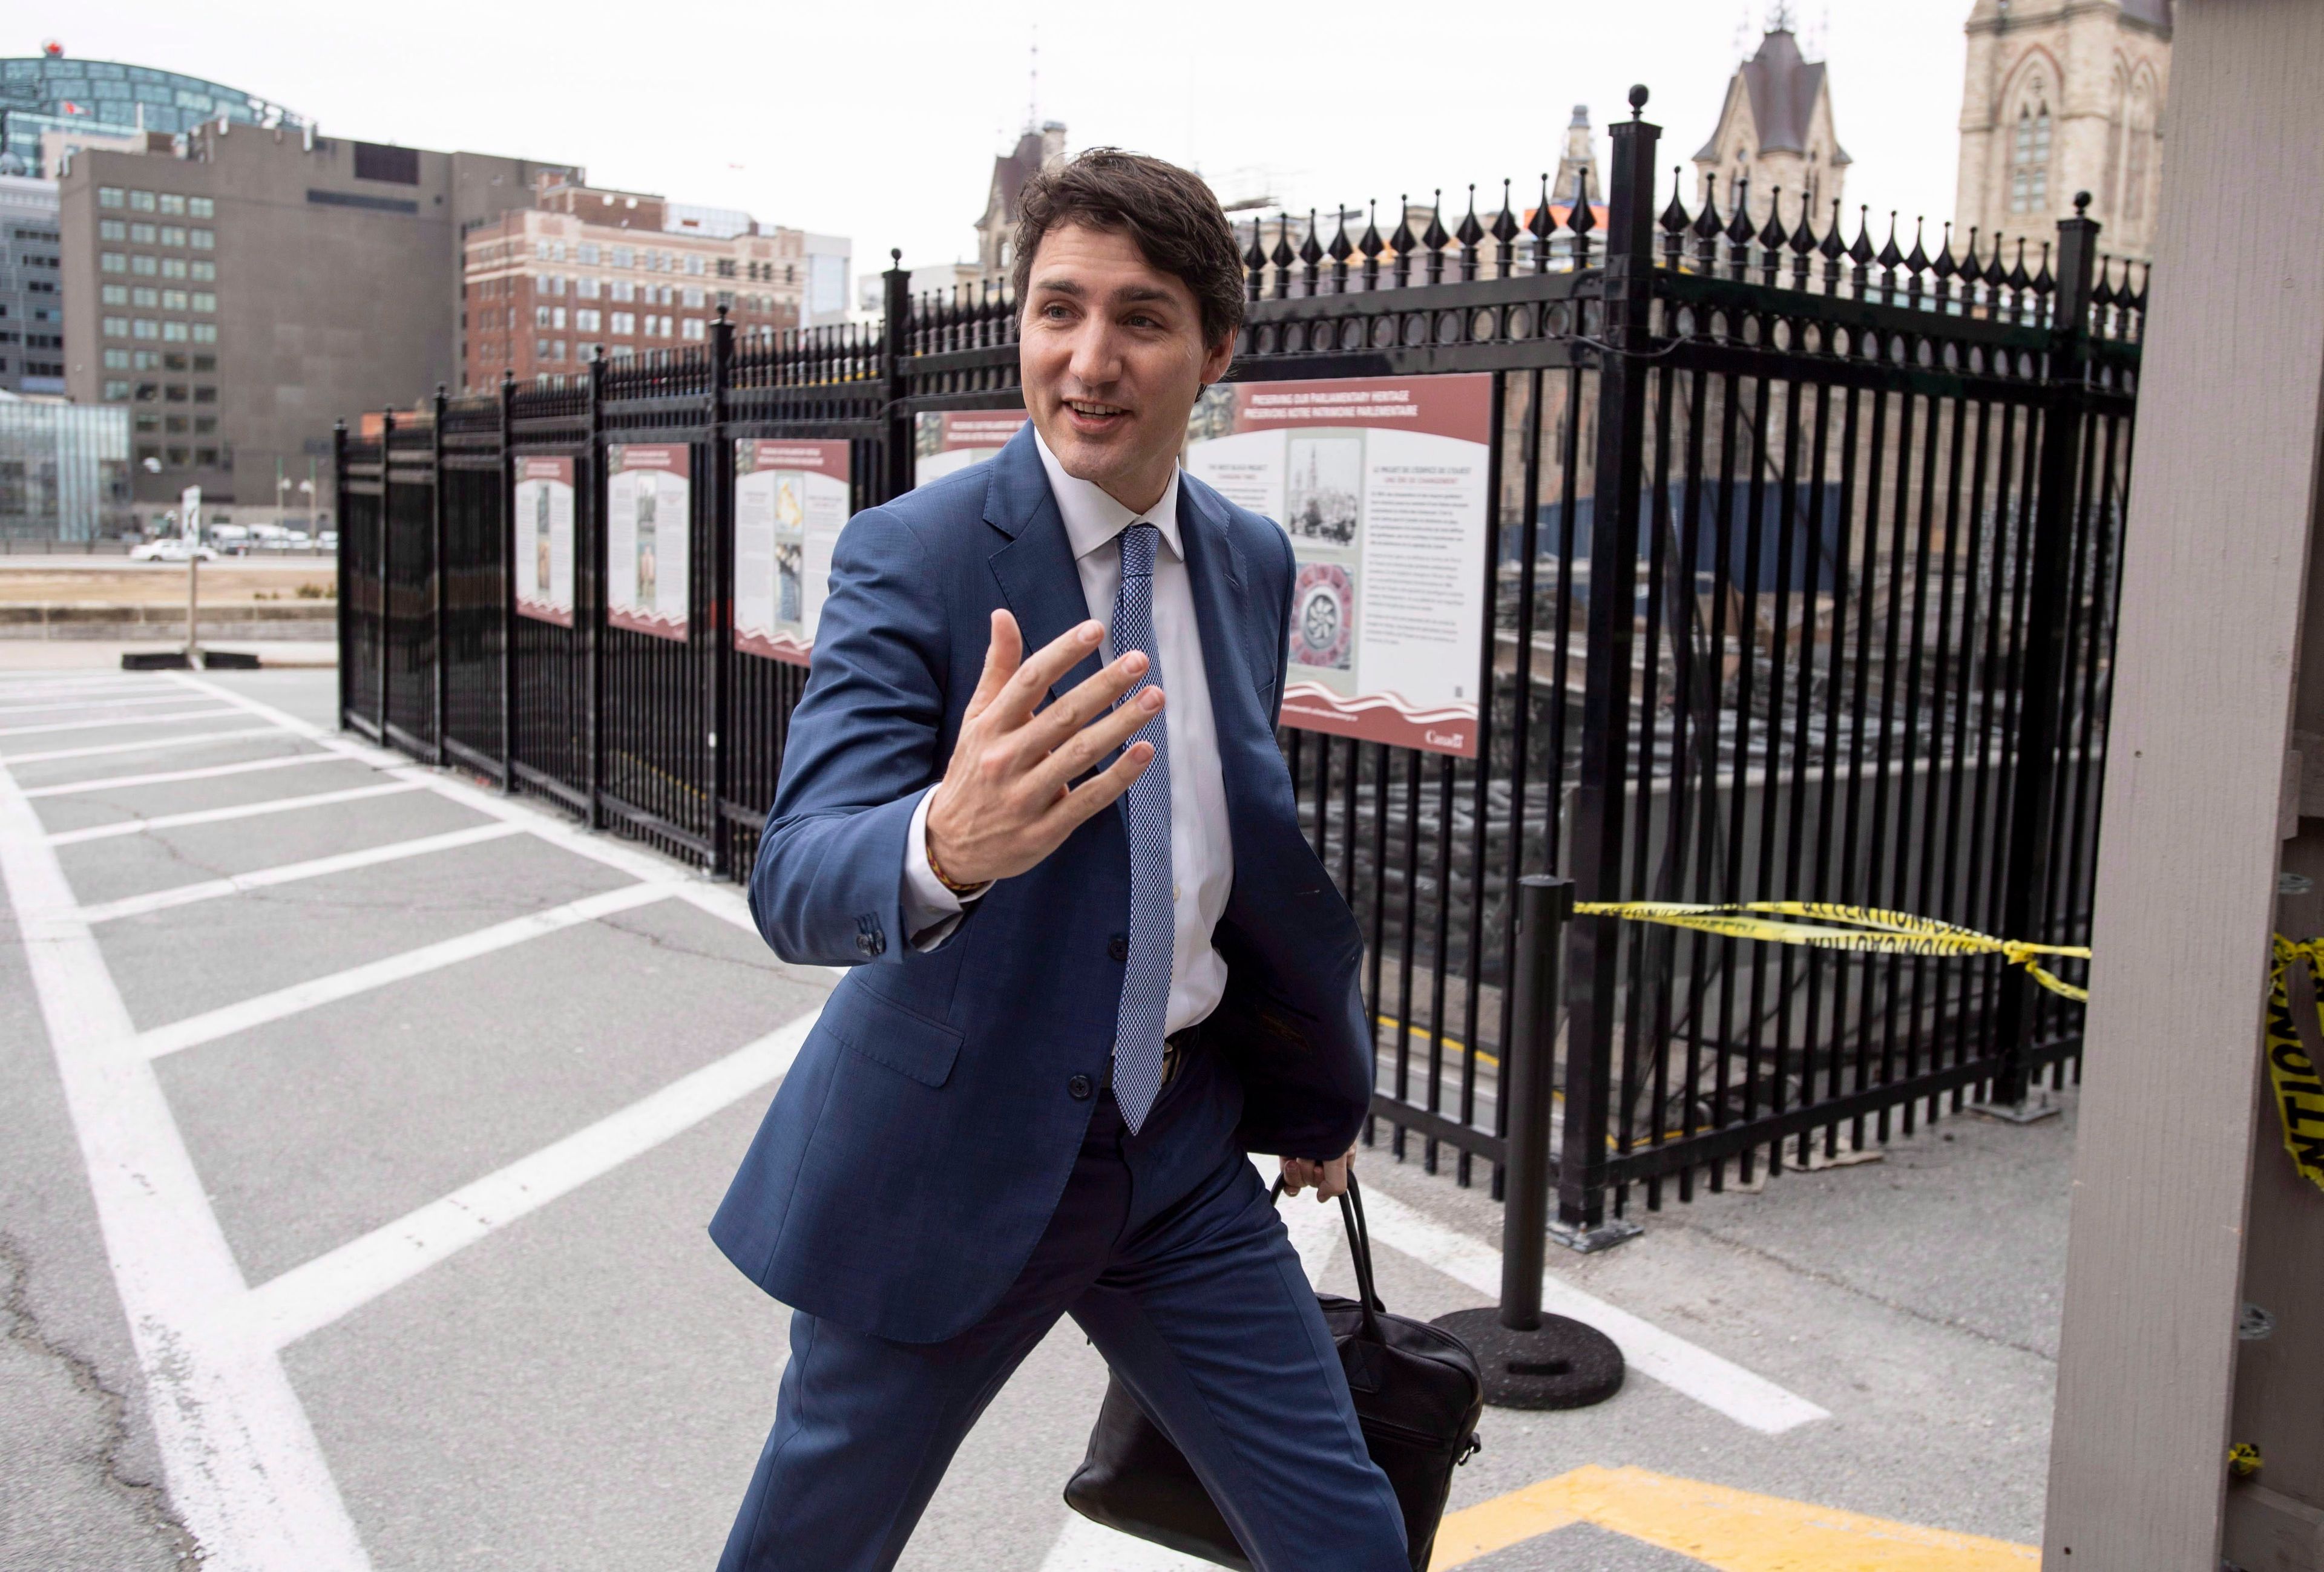 Prime Minister Justin Trudeau arrives on Parliament Hill before a meeting with B.C. Premier John Horgan and Alberta Premier Rachel Notley, on the deadlock over Kinder Morgan's Trans Mountain pipeline expansion in Ottawa on Sunday, April 15, 2018. (Justin Tang/CP)